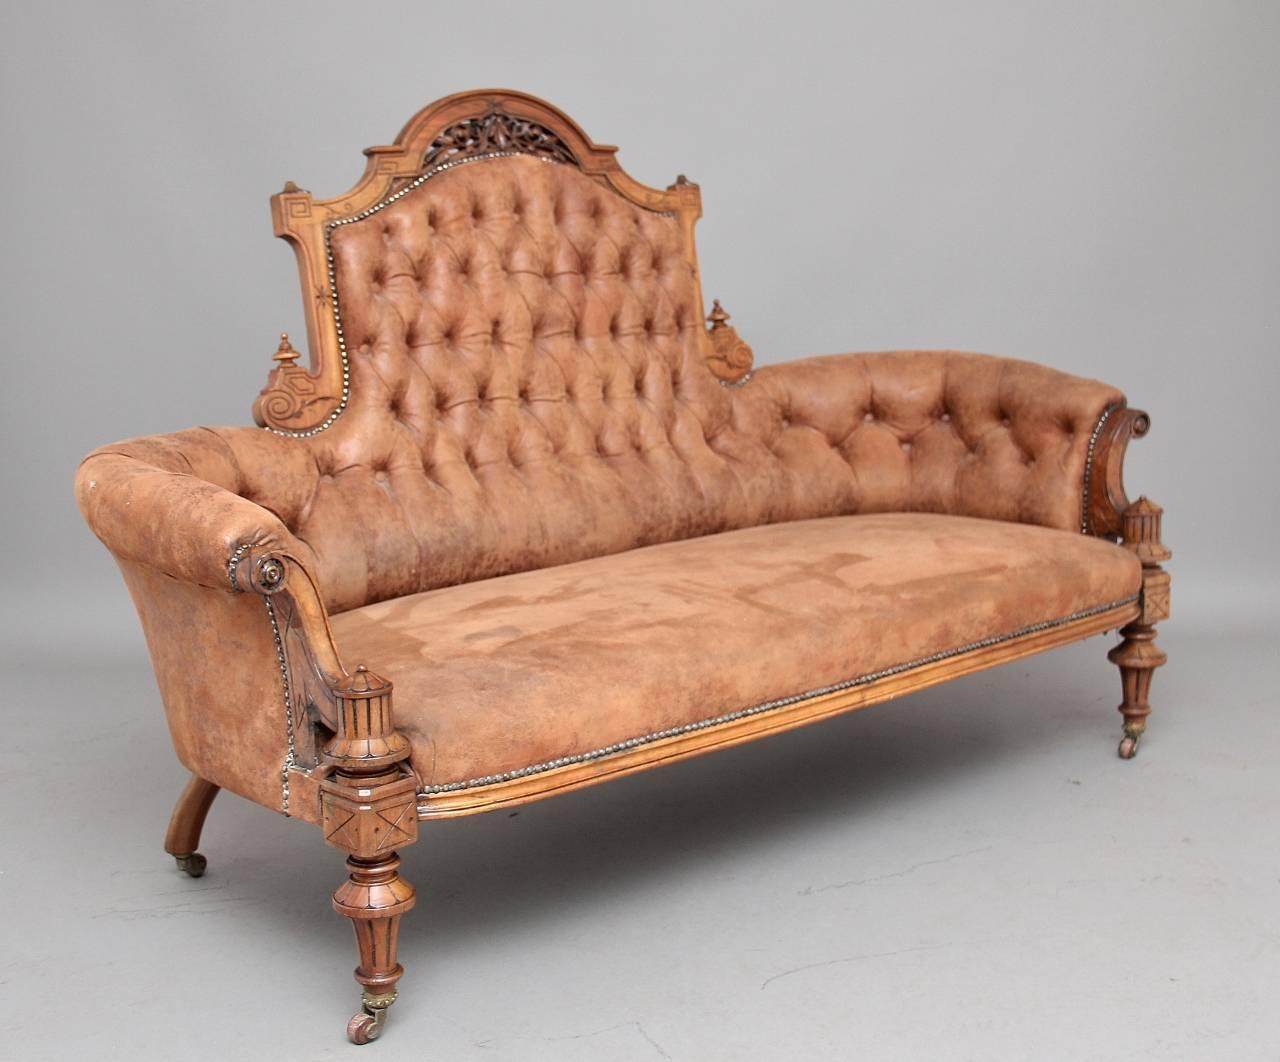 19th century walnut sofa in the art’s and craft style, the tub shaped sofa with buttoned brown leather upholstery with stud work decoration, the walnut frame comprising of various carving and finials, supported on turned and carved legs, circa 1870.